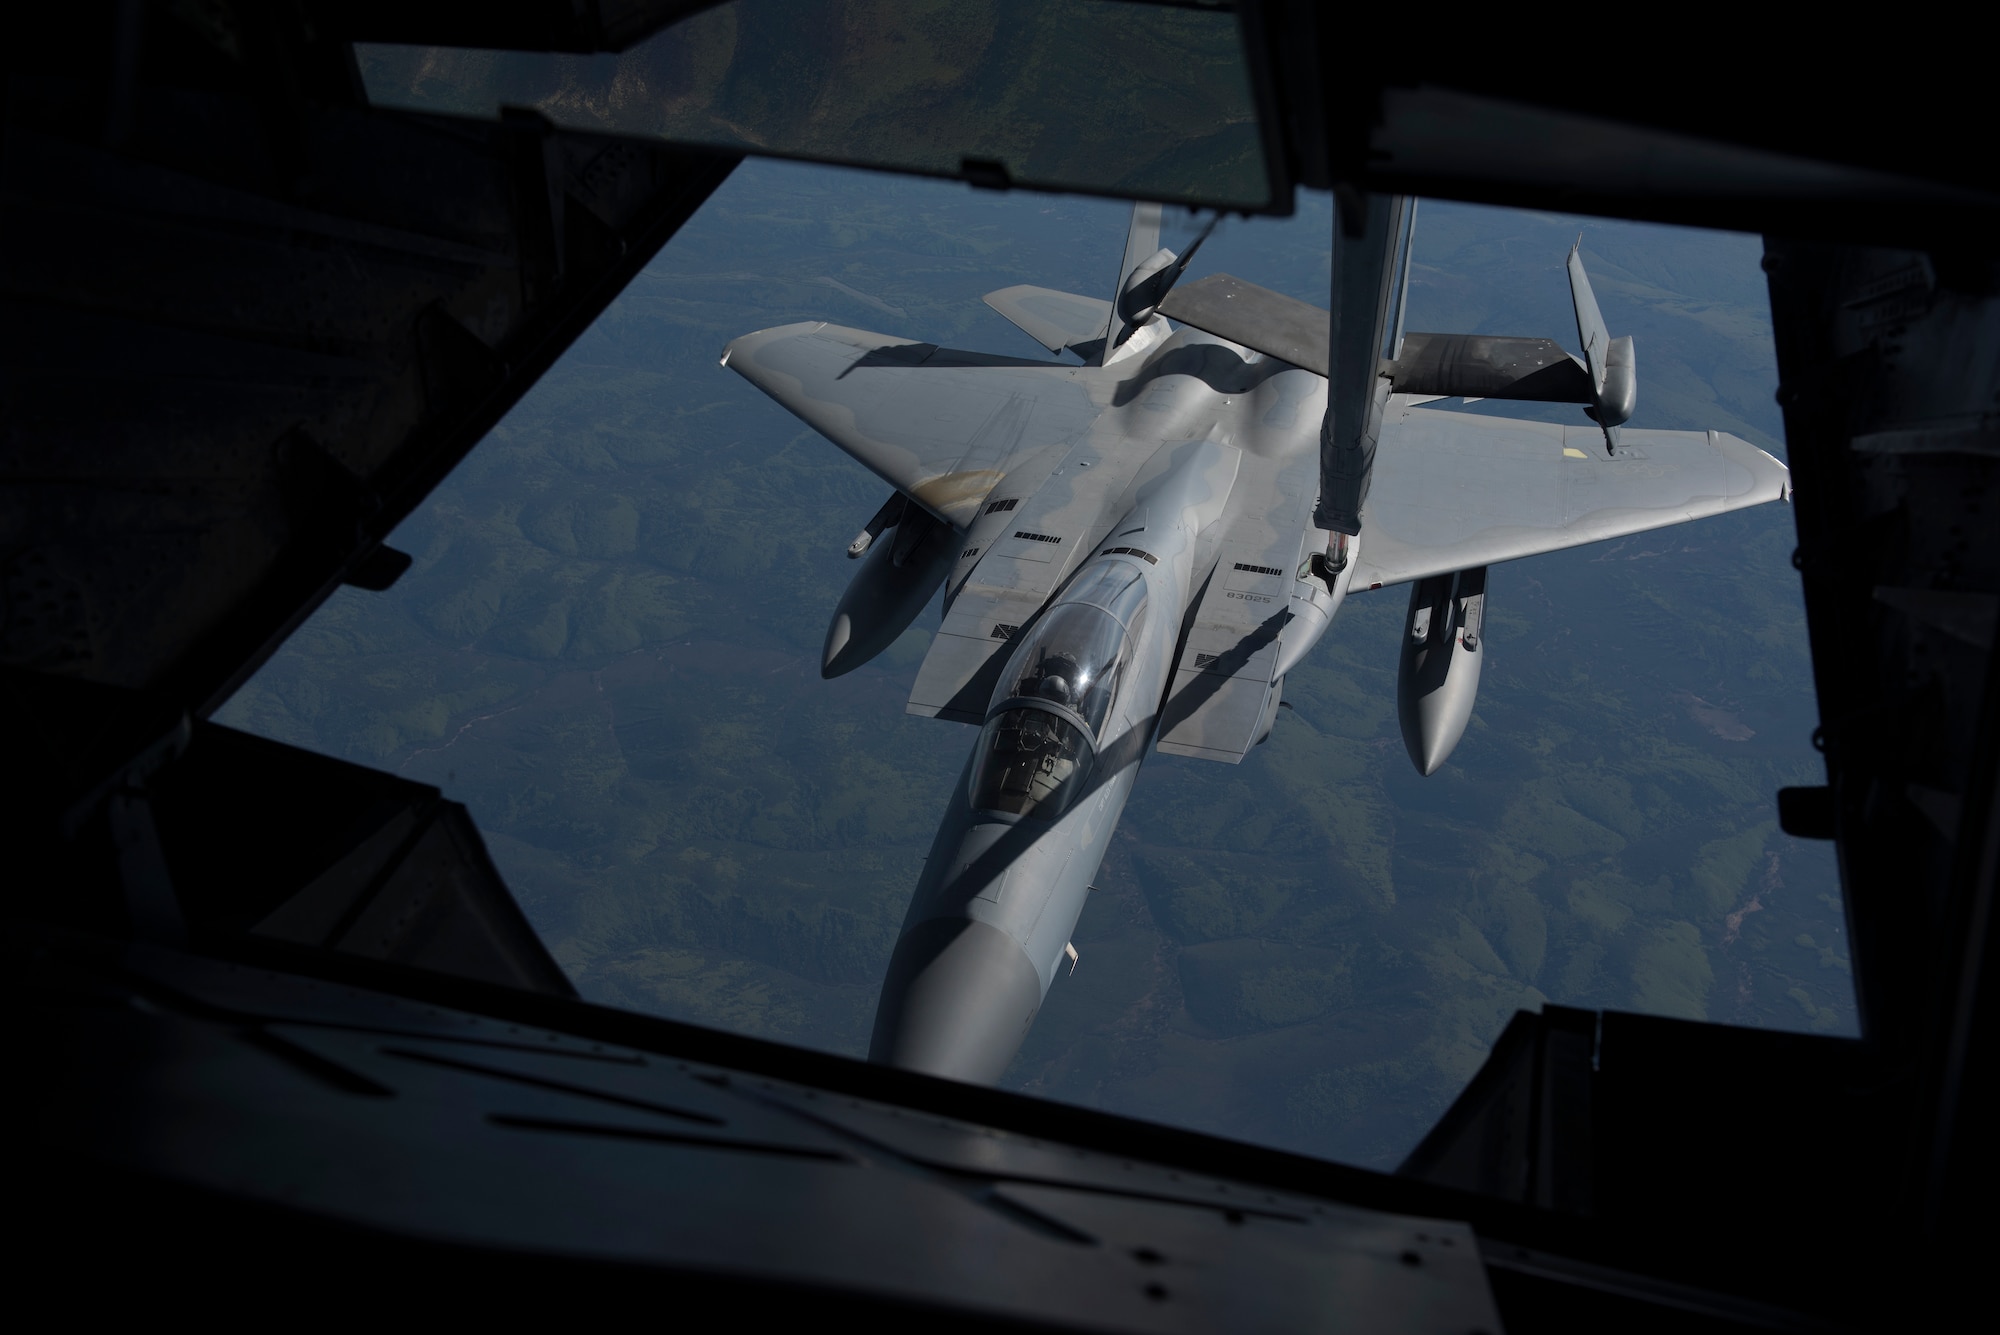 A U.S. Air Force F-15C Eagle assigned to the 18th Wing at Kadena Air Base, Japan, is refueled by a KC-10 Extender from the 6th Air Refueling Squadron, Travis Air Force Base, Calif., June 2, 2018. The KC-10 refueled two F-15C Eagles a total of 16 times, offloading a total of 78,400 pounds of fuel over a distance covering nearly 2,300 nautical miles on a mission in the Indo-Pacific region. (U.S. Air Force photo by Tech. Sgt. James Hodgman)